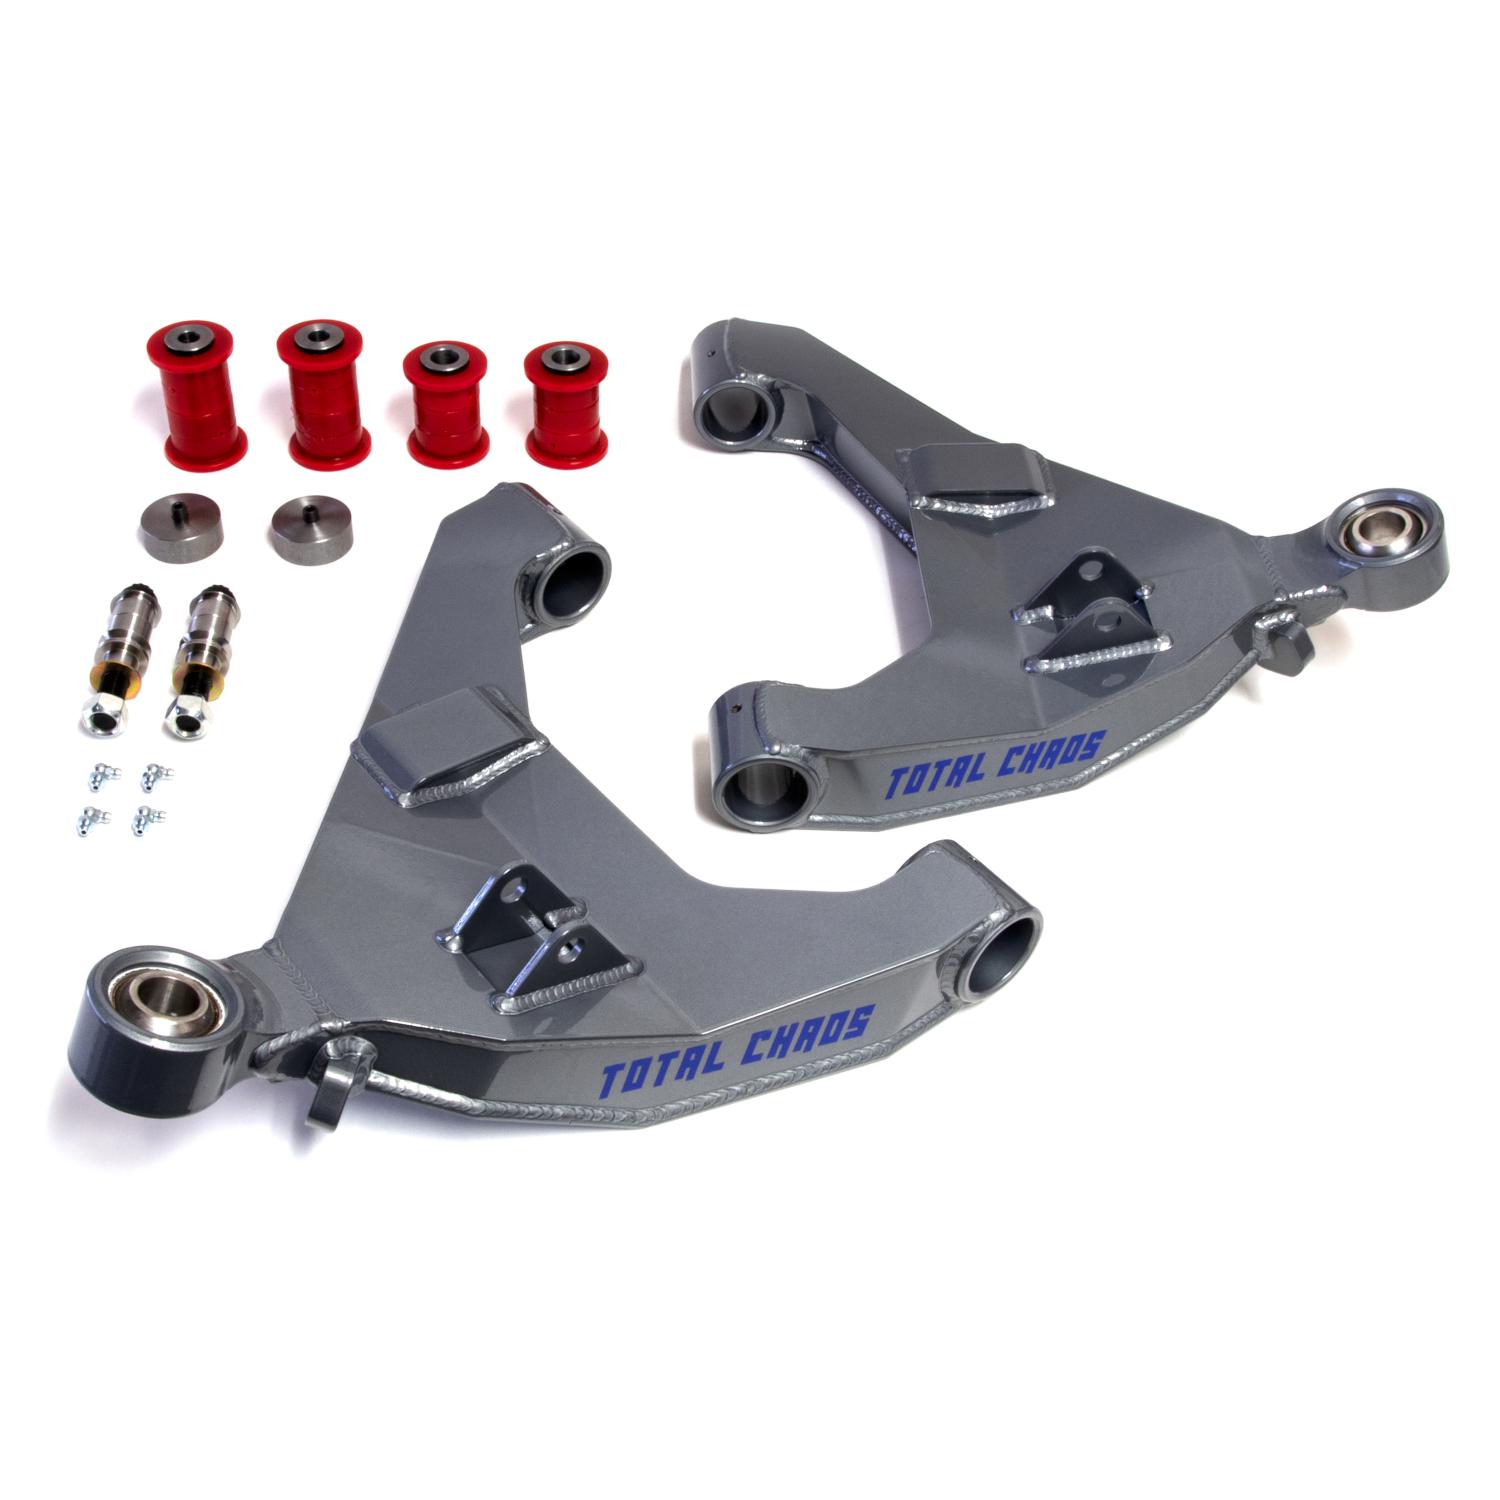 Total Chaos Stock Length 4130 Expedition Series Lower Control Arms - No Secondary Shock Mounts 2007-2009 FJ Cruiser